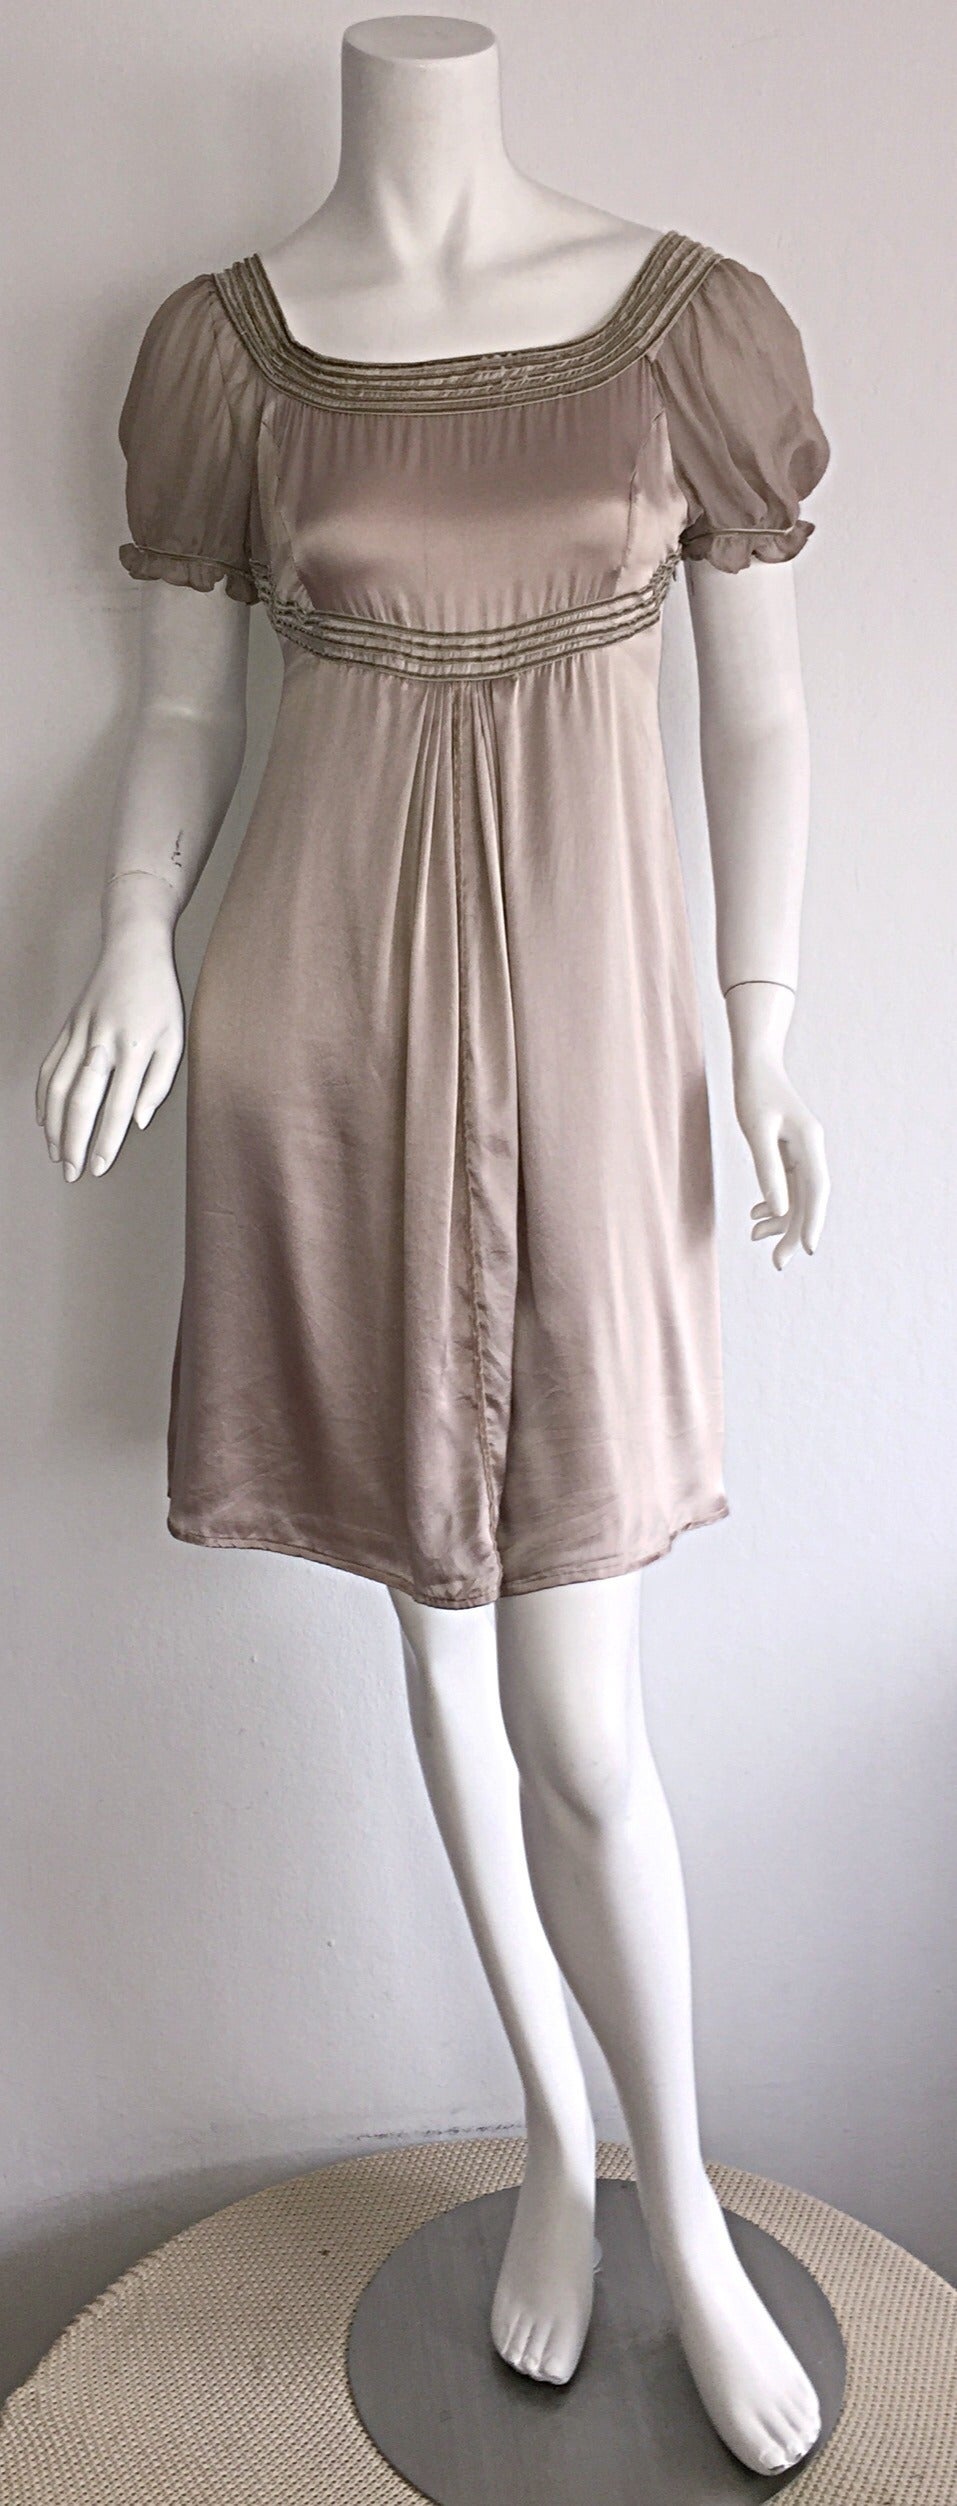 Such a sweet, romantic Marc Jacobs champagne/beige silk Babydoll dress! 1990s look, with a modern twist. Flattering pleats down front center. Velvet accents at collar and waist. Can easily transition from day to night. Fully lined. In great